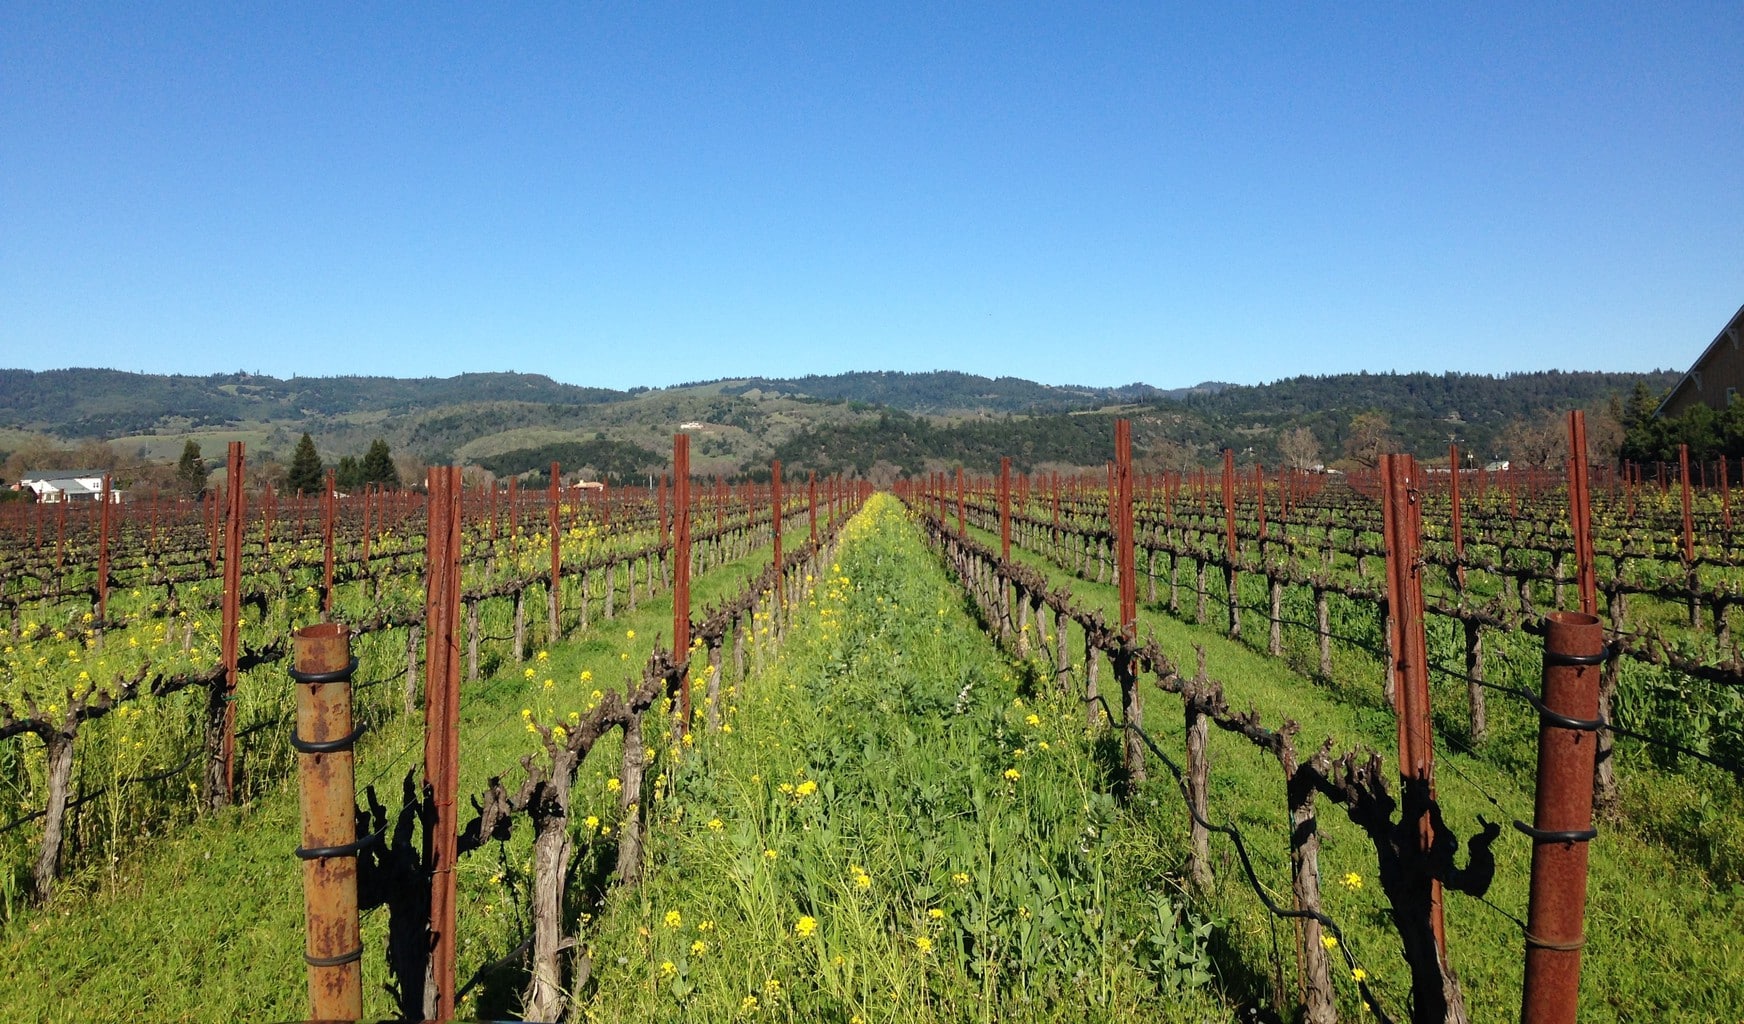 6 alternative things to do in Napa Valley beyond wine tasting